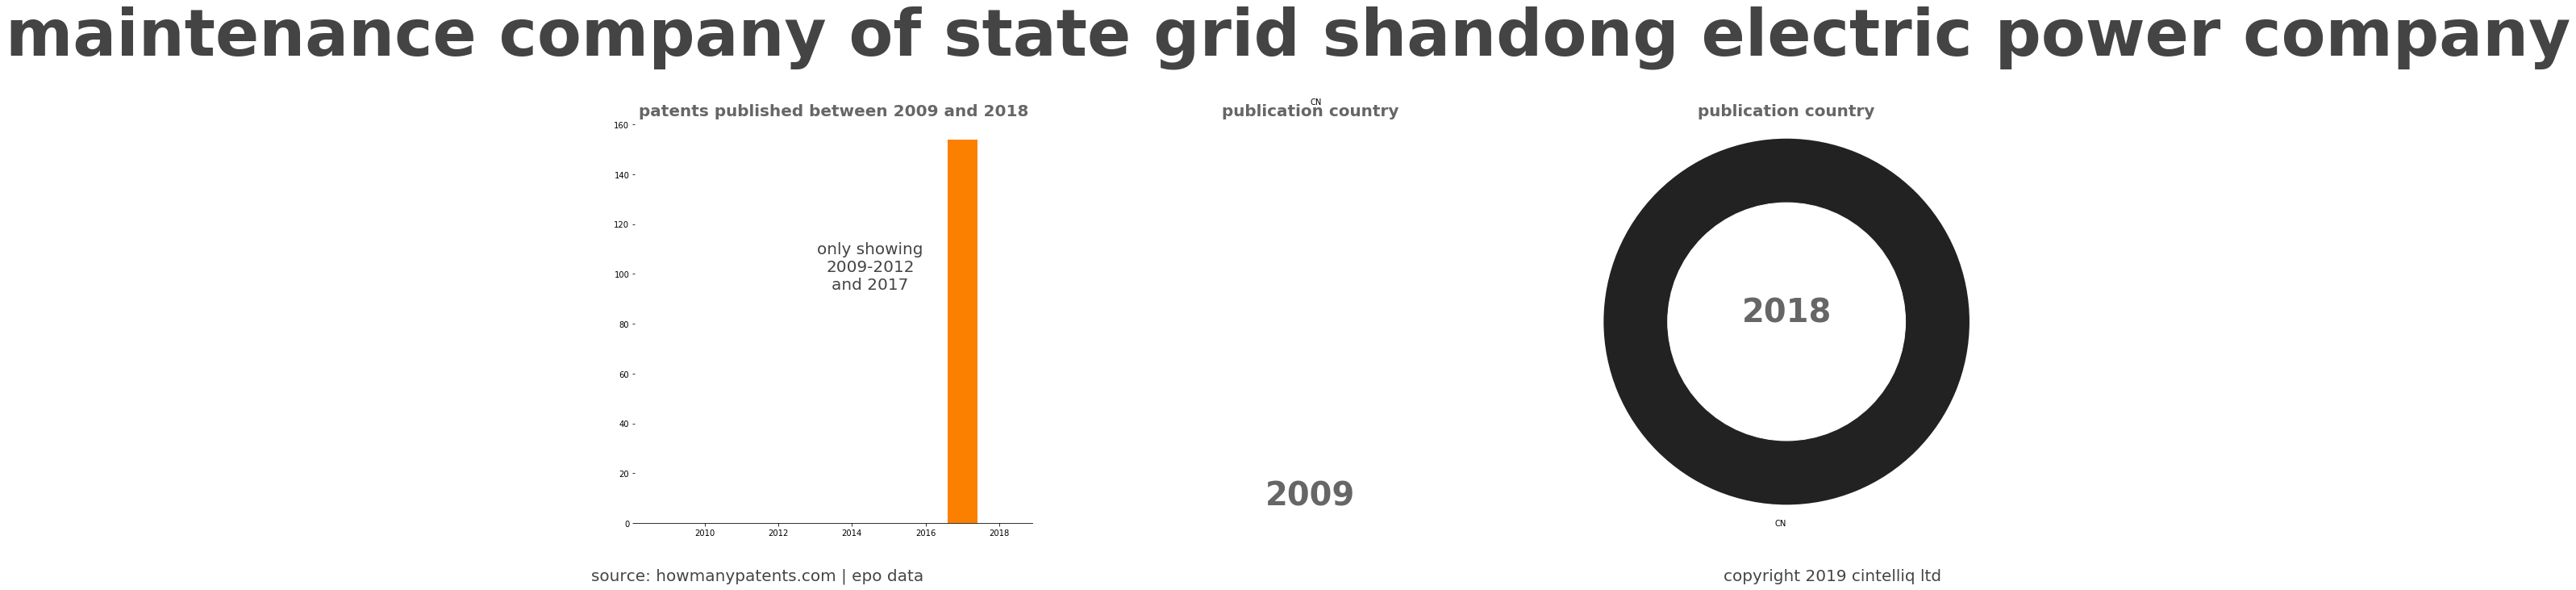 summary of patents for Maintenance Company Of State Grid Shandong Electric Power Company